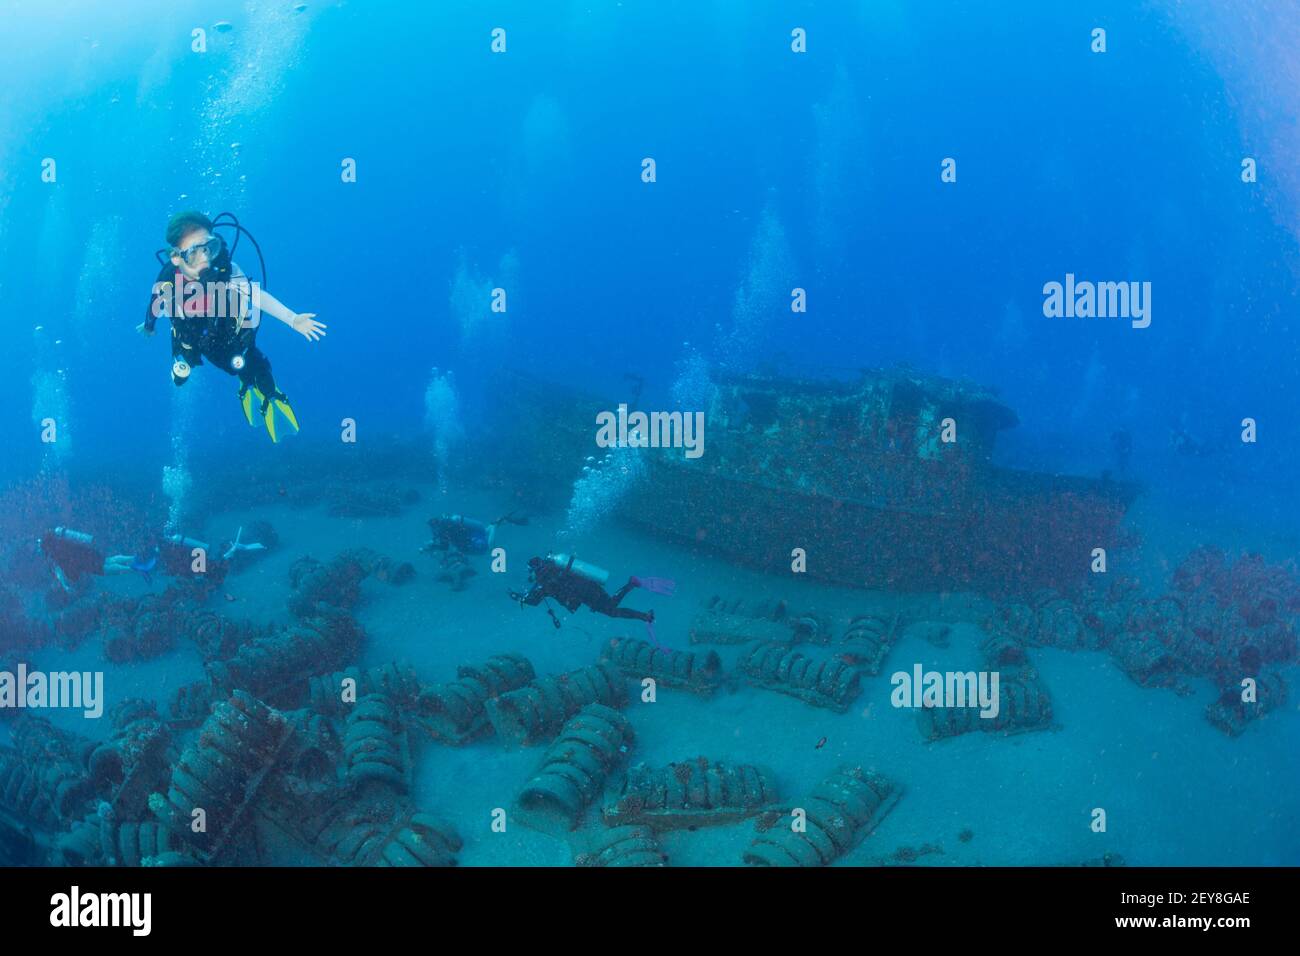 Divers (MR) on the wreck of the St. Anthony off Maui, Hawaii. The tires in concrete around the wreck were an attempt at an artificial reef. Stock Photo